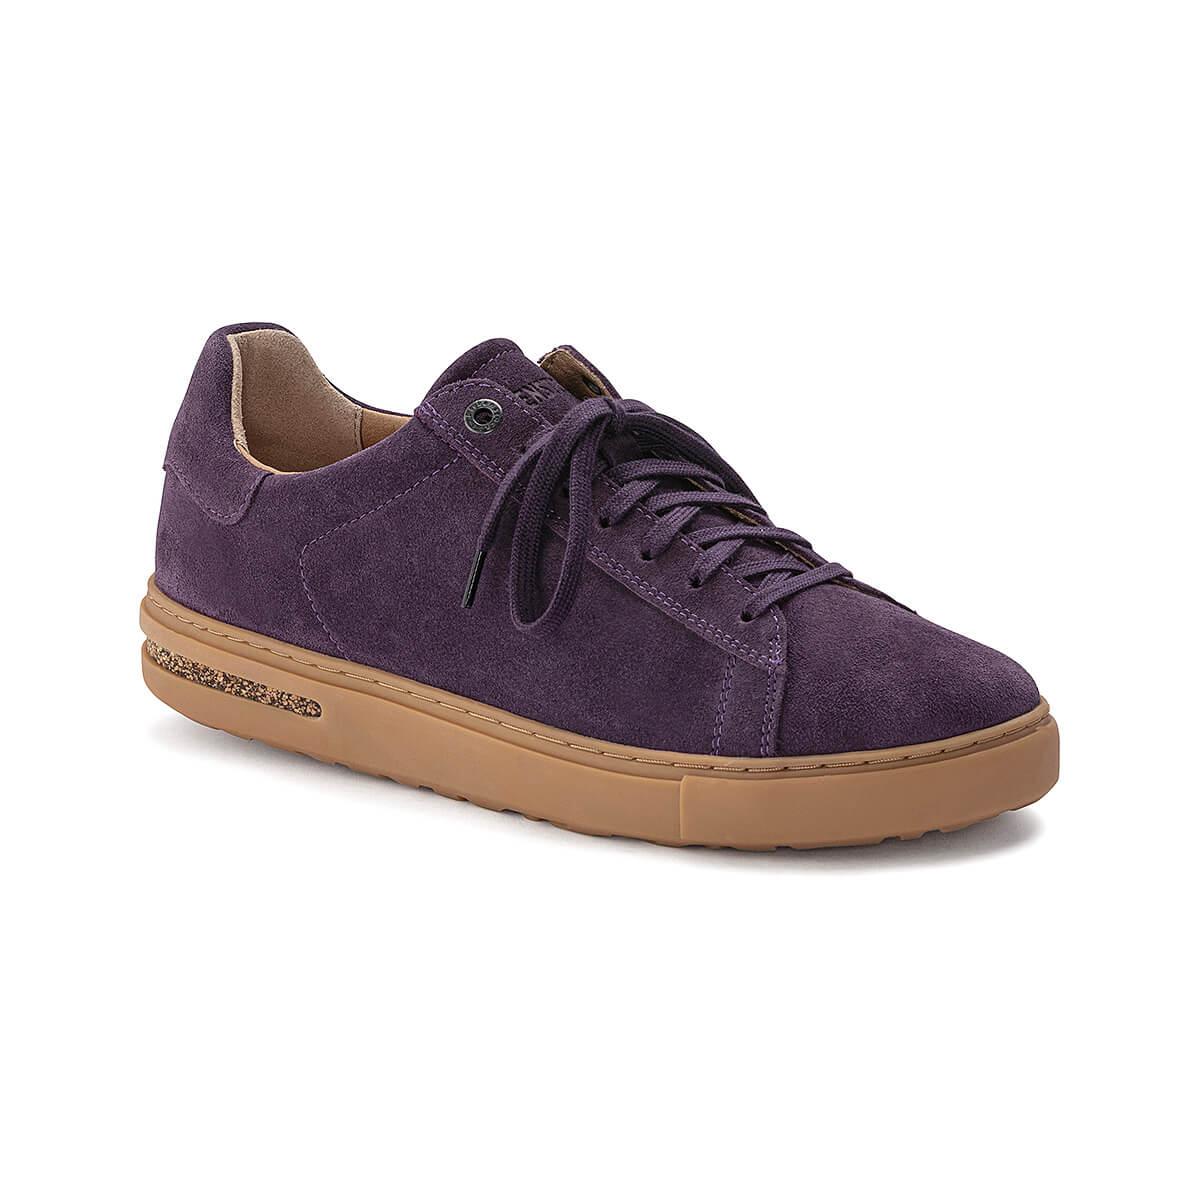  Women's Bend Suede Shoes